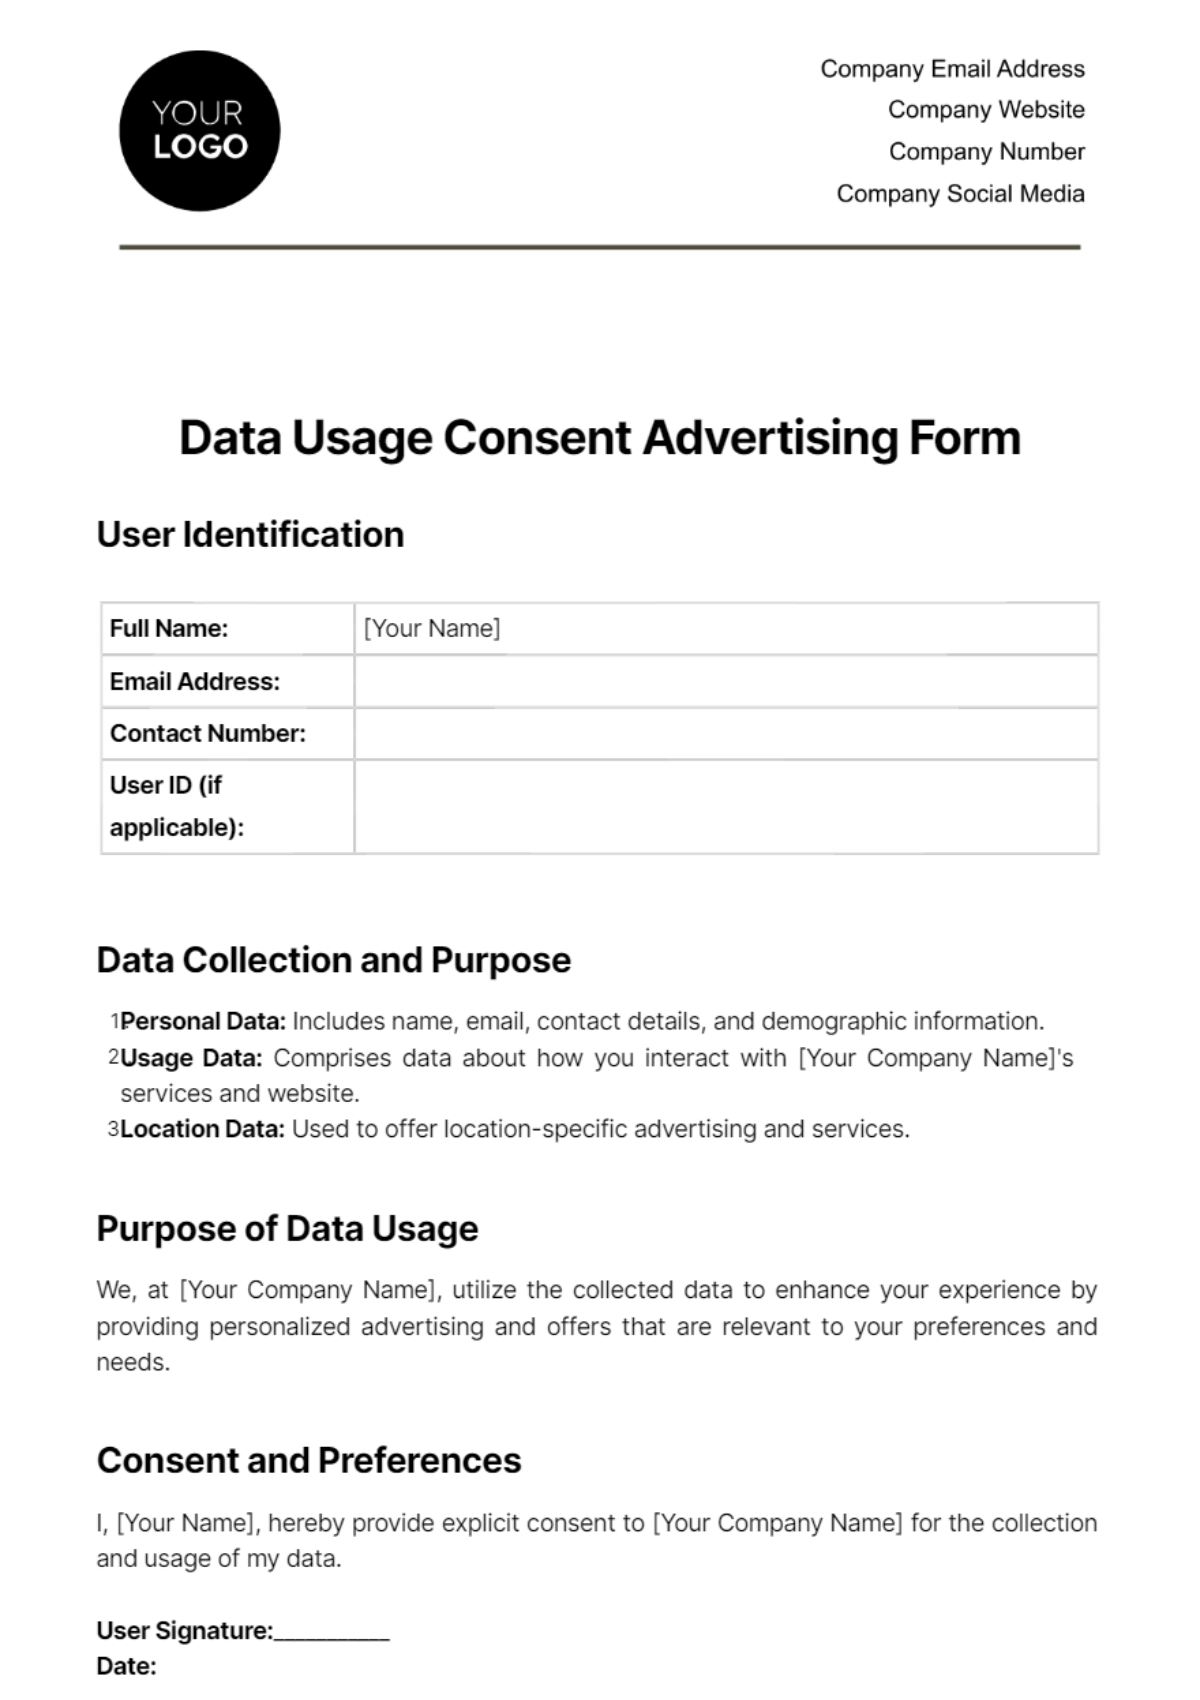 Free Data Usage Consent Advertising Form Template